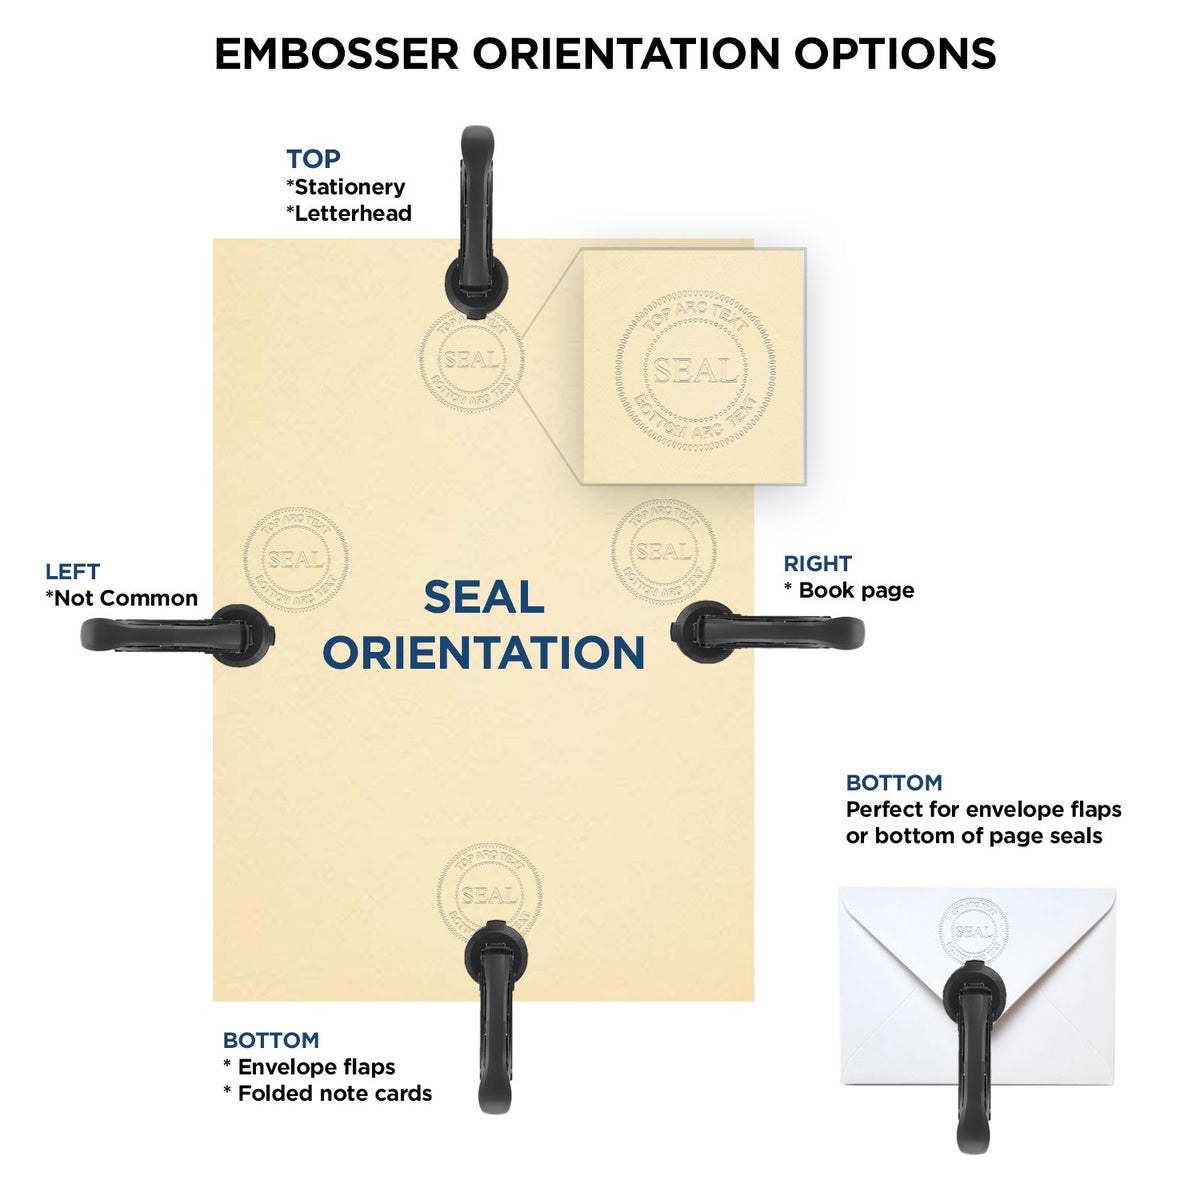 An infographic for the Montana Geologist Desk Seal showing embosser orientation, this is showing examples of a top, bottom, right and left insert.